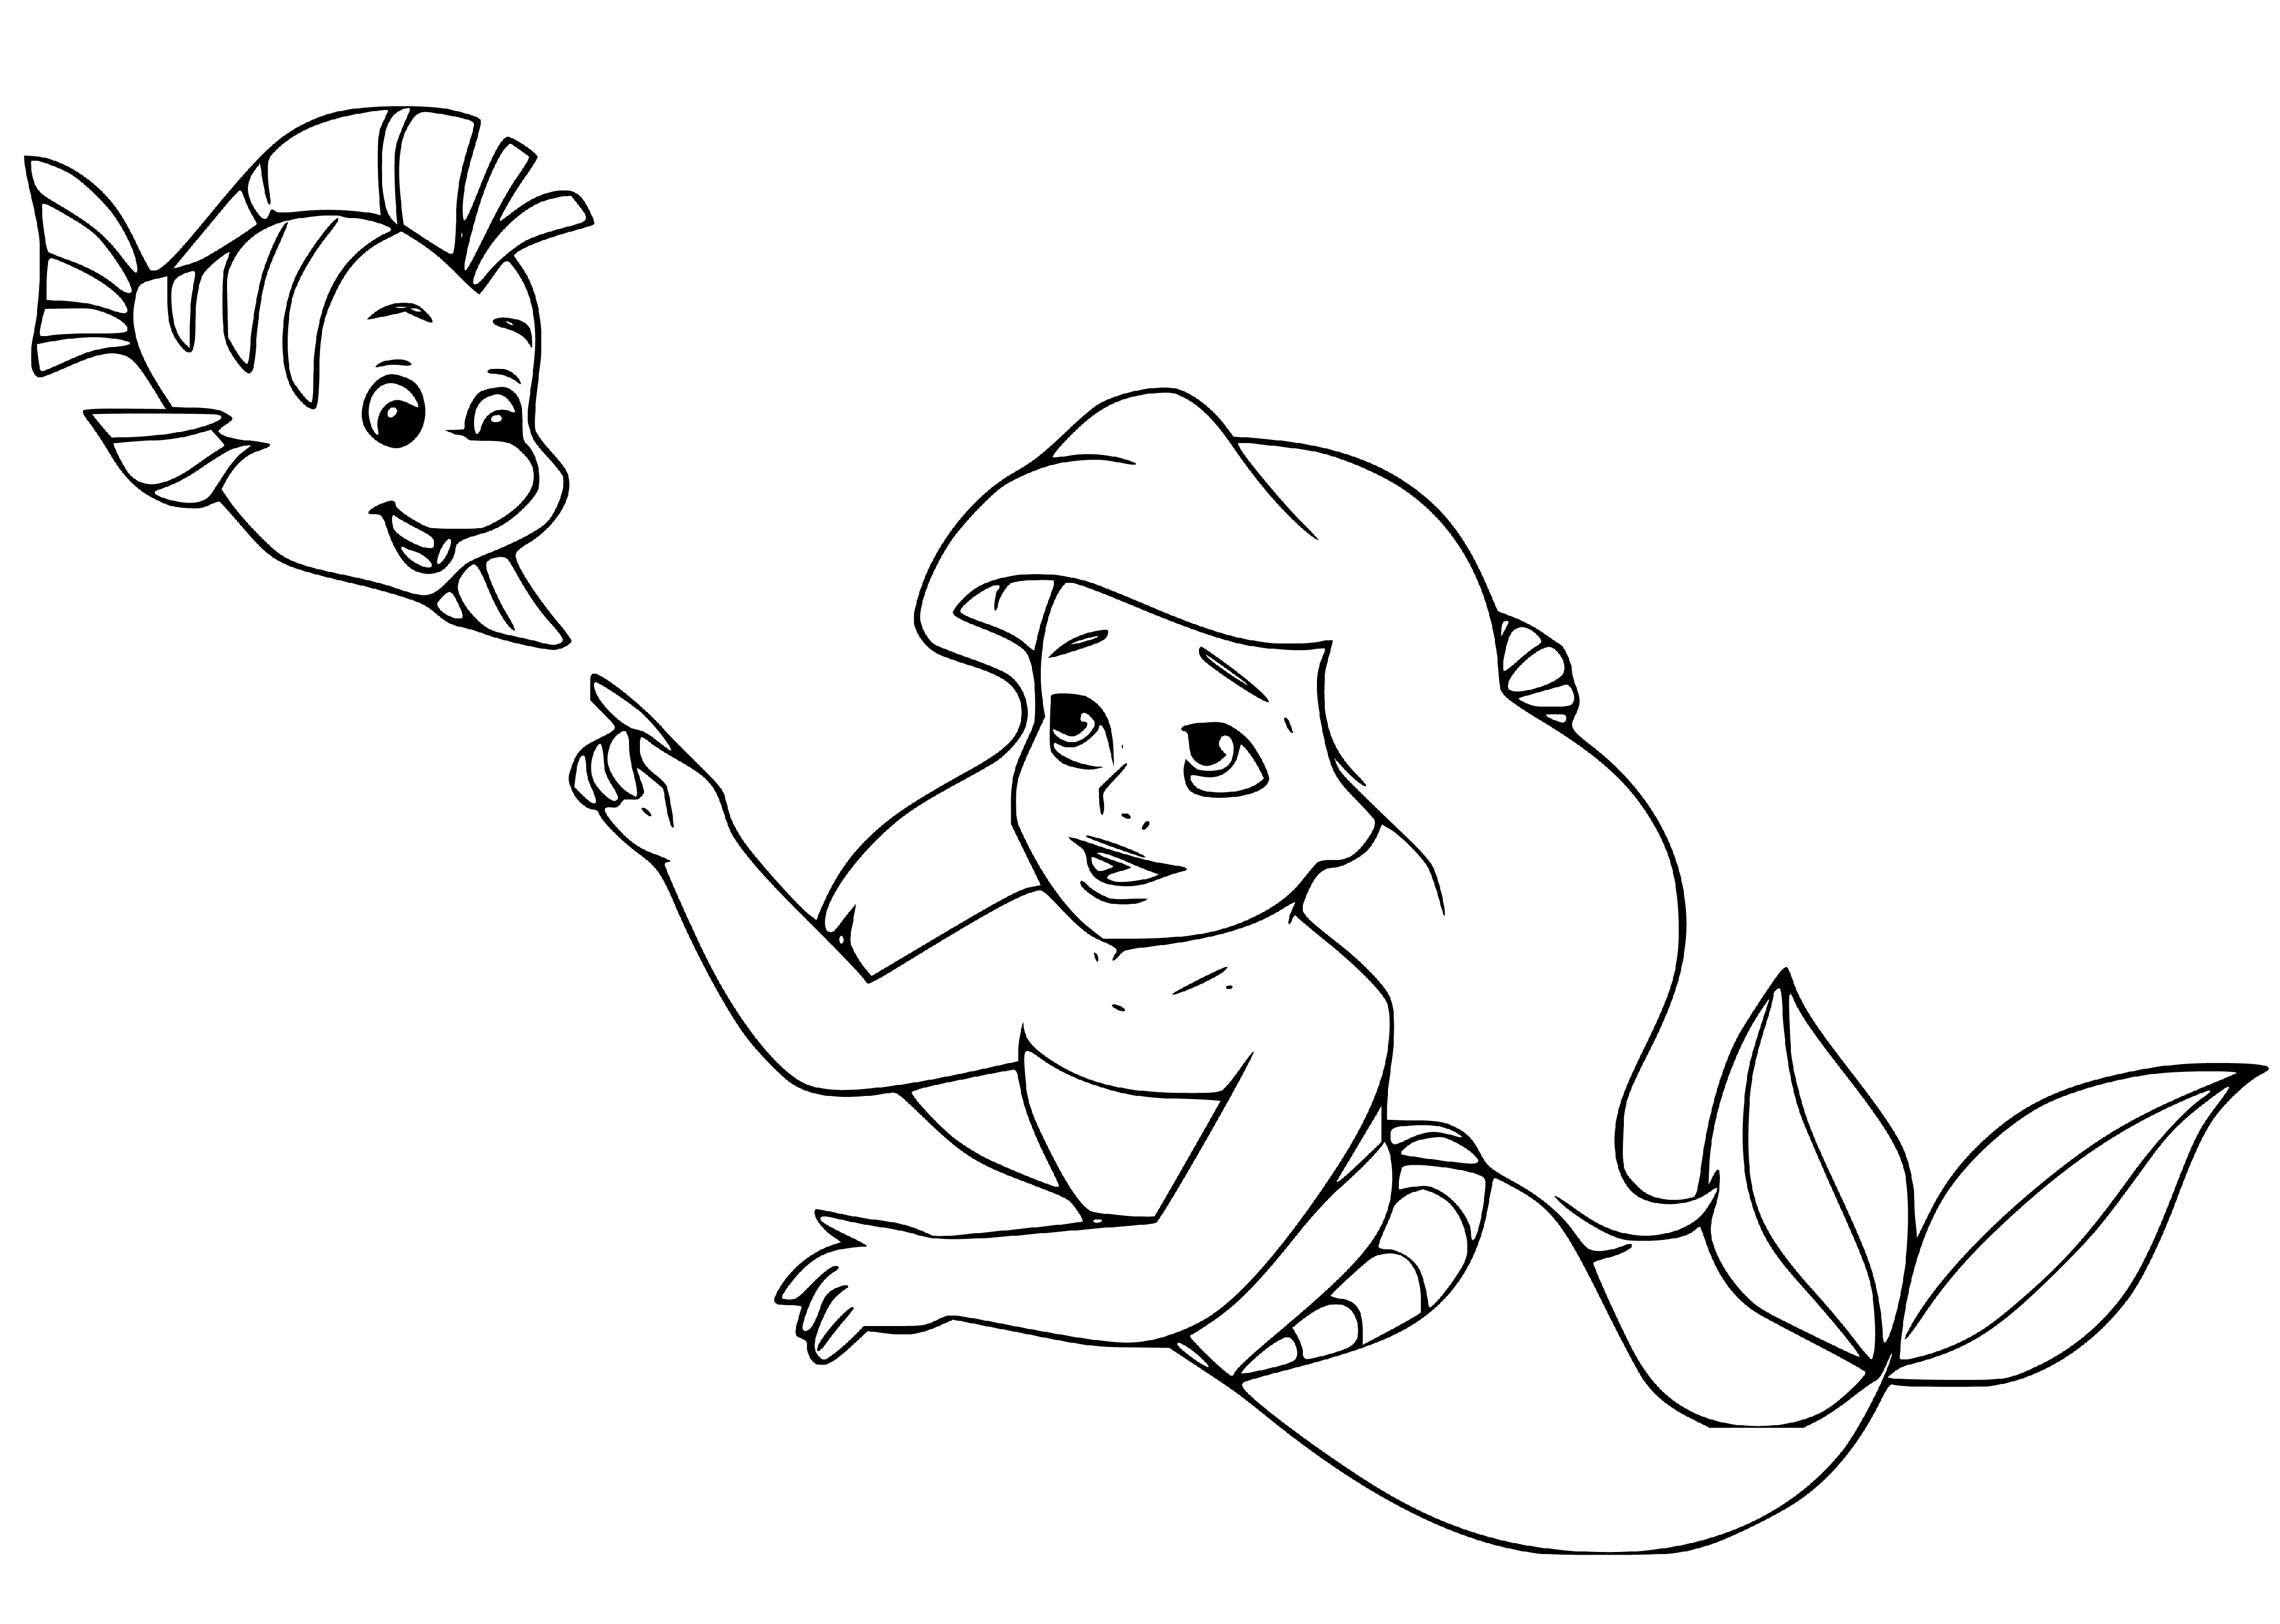 Baby Ariel The Little Mermaid Coloring Page - SheetalColor.com